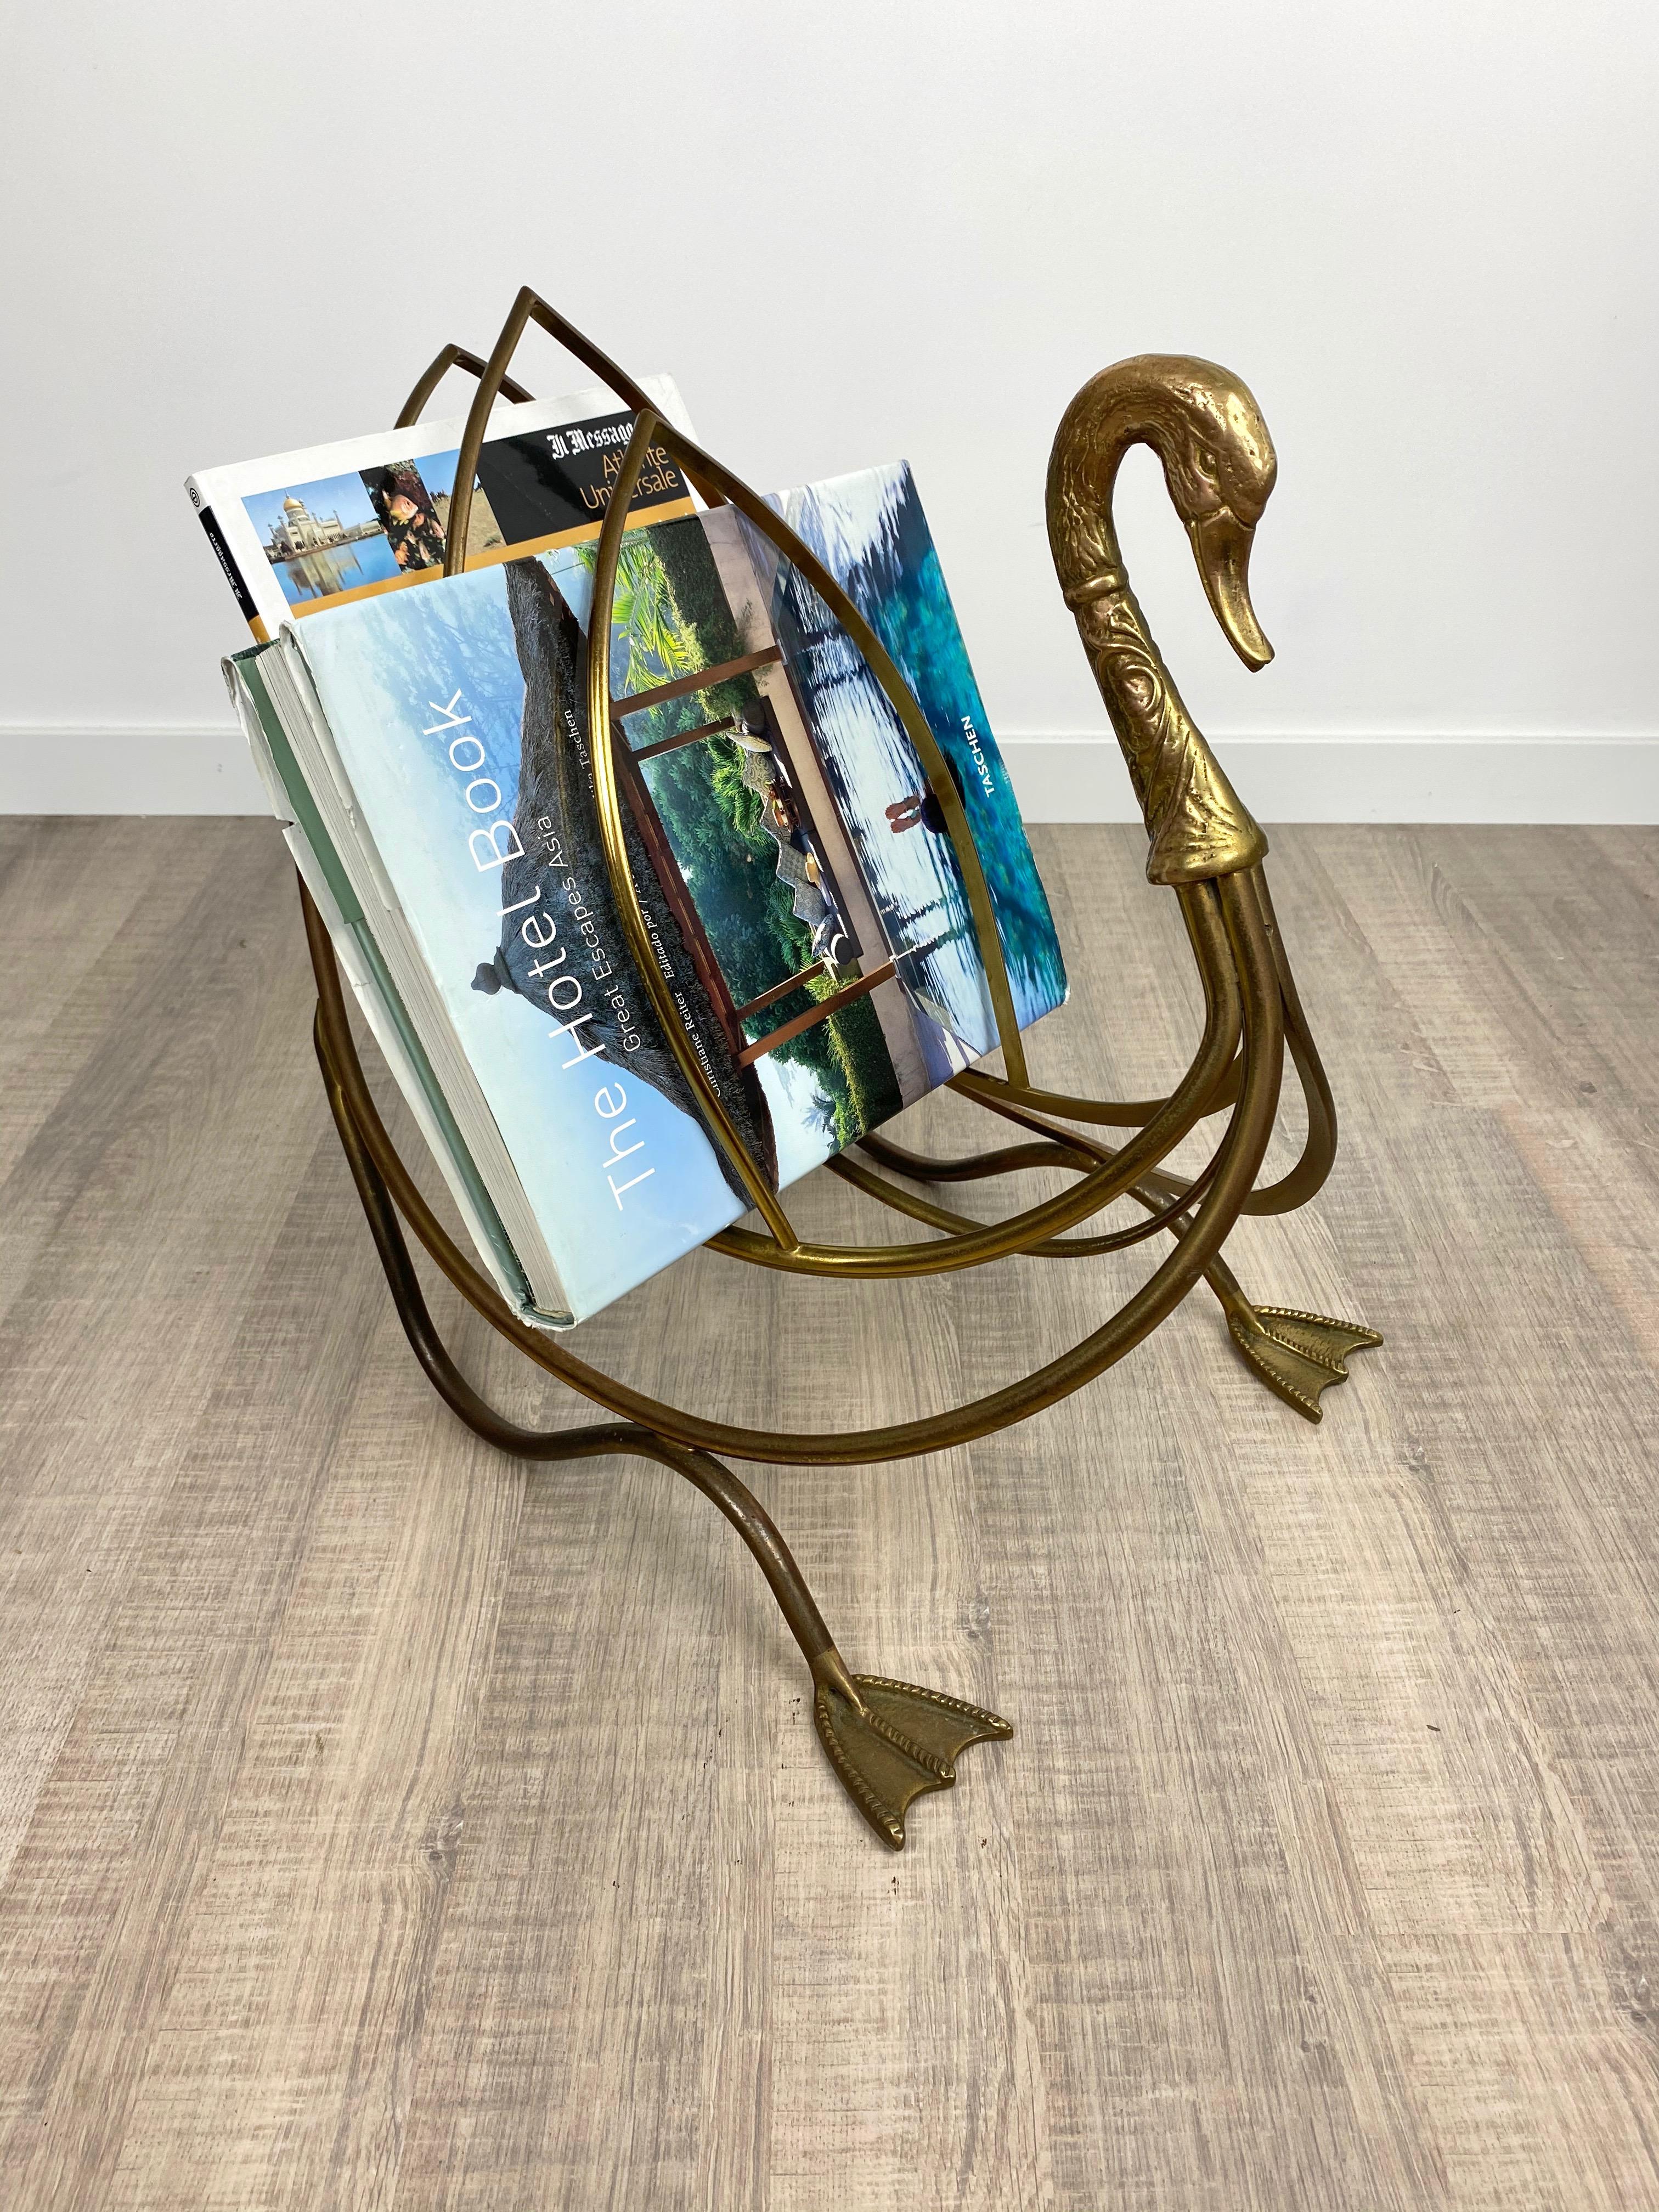 Solid brass swan magazine holder made by the French Maison Jansen. The piece features detailed swan head and feet and copious space for magazines and newspapers. Made in France in the 1960s, the piece is in great vintage condition with